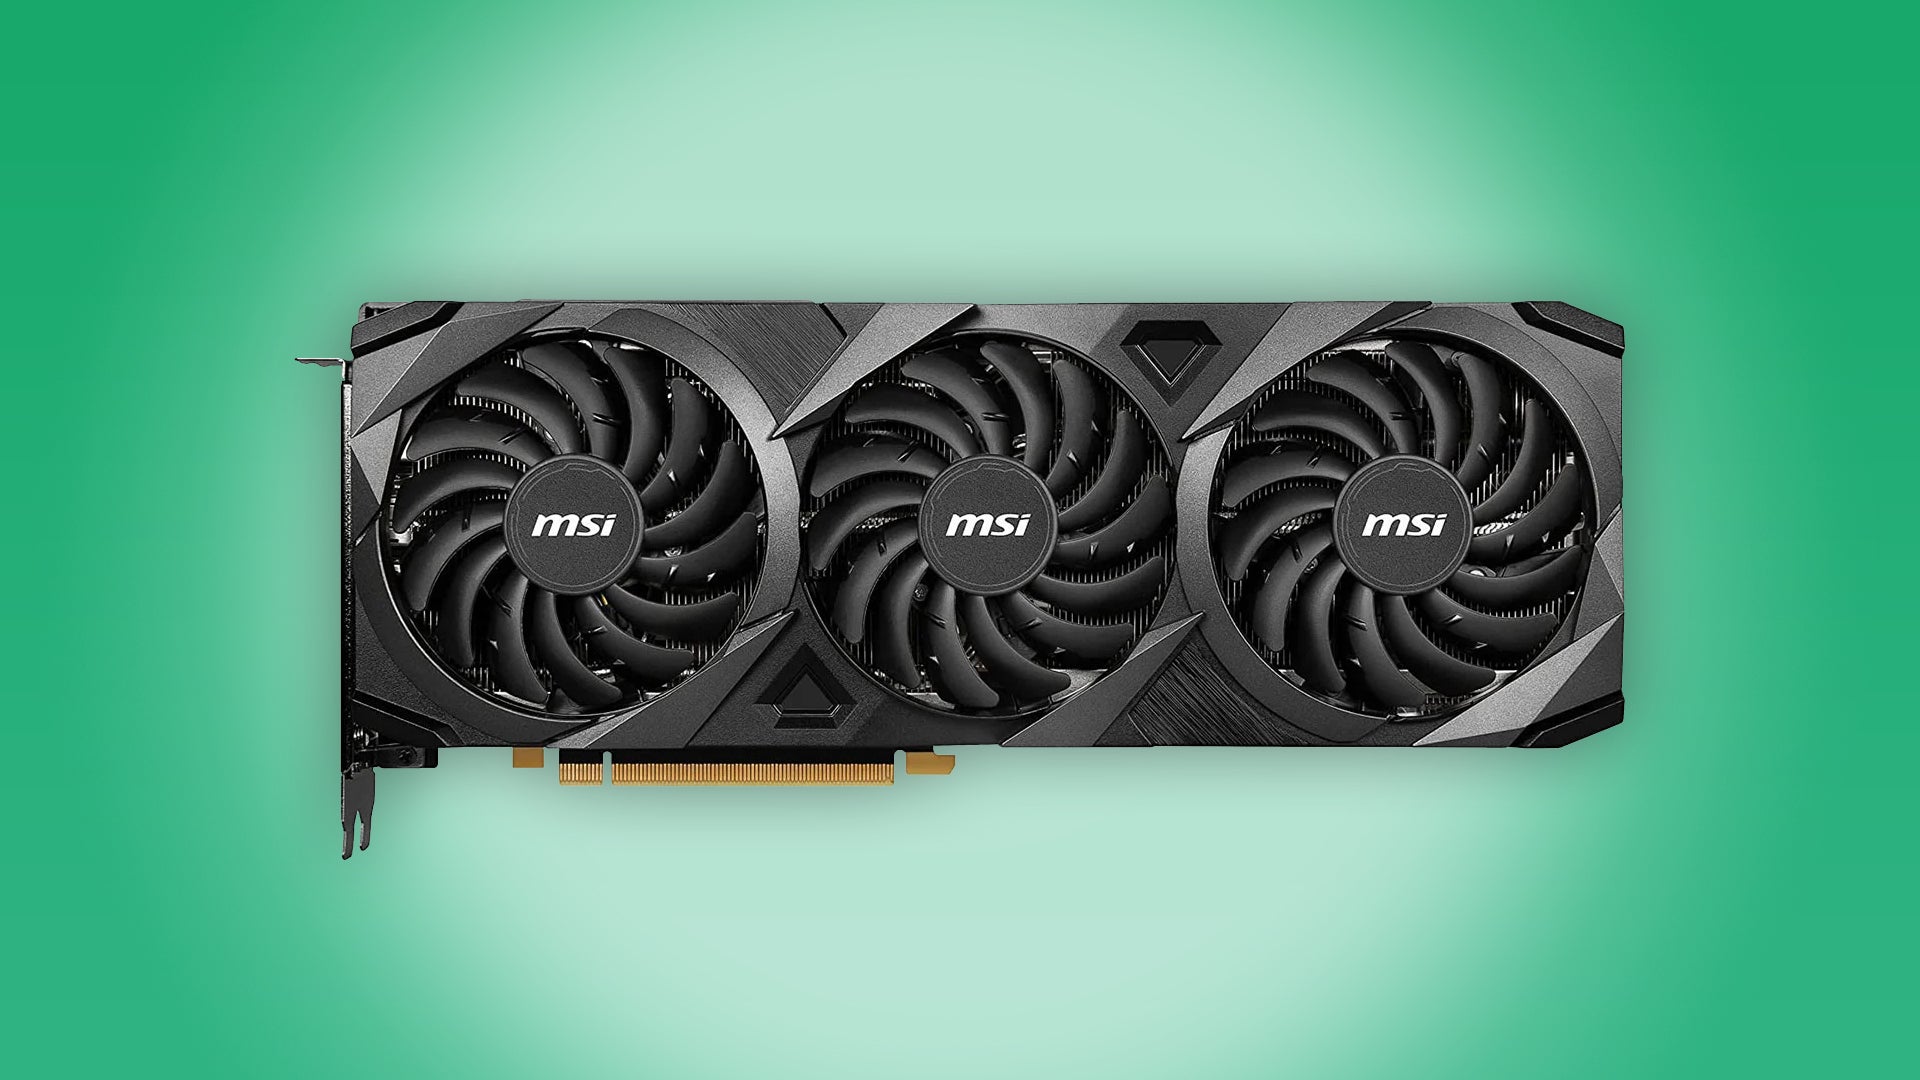 This MSI Ventus RTX 3080 12GB graphics card is $810 at Newegg